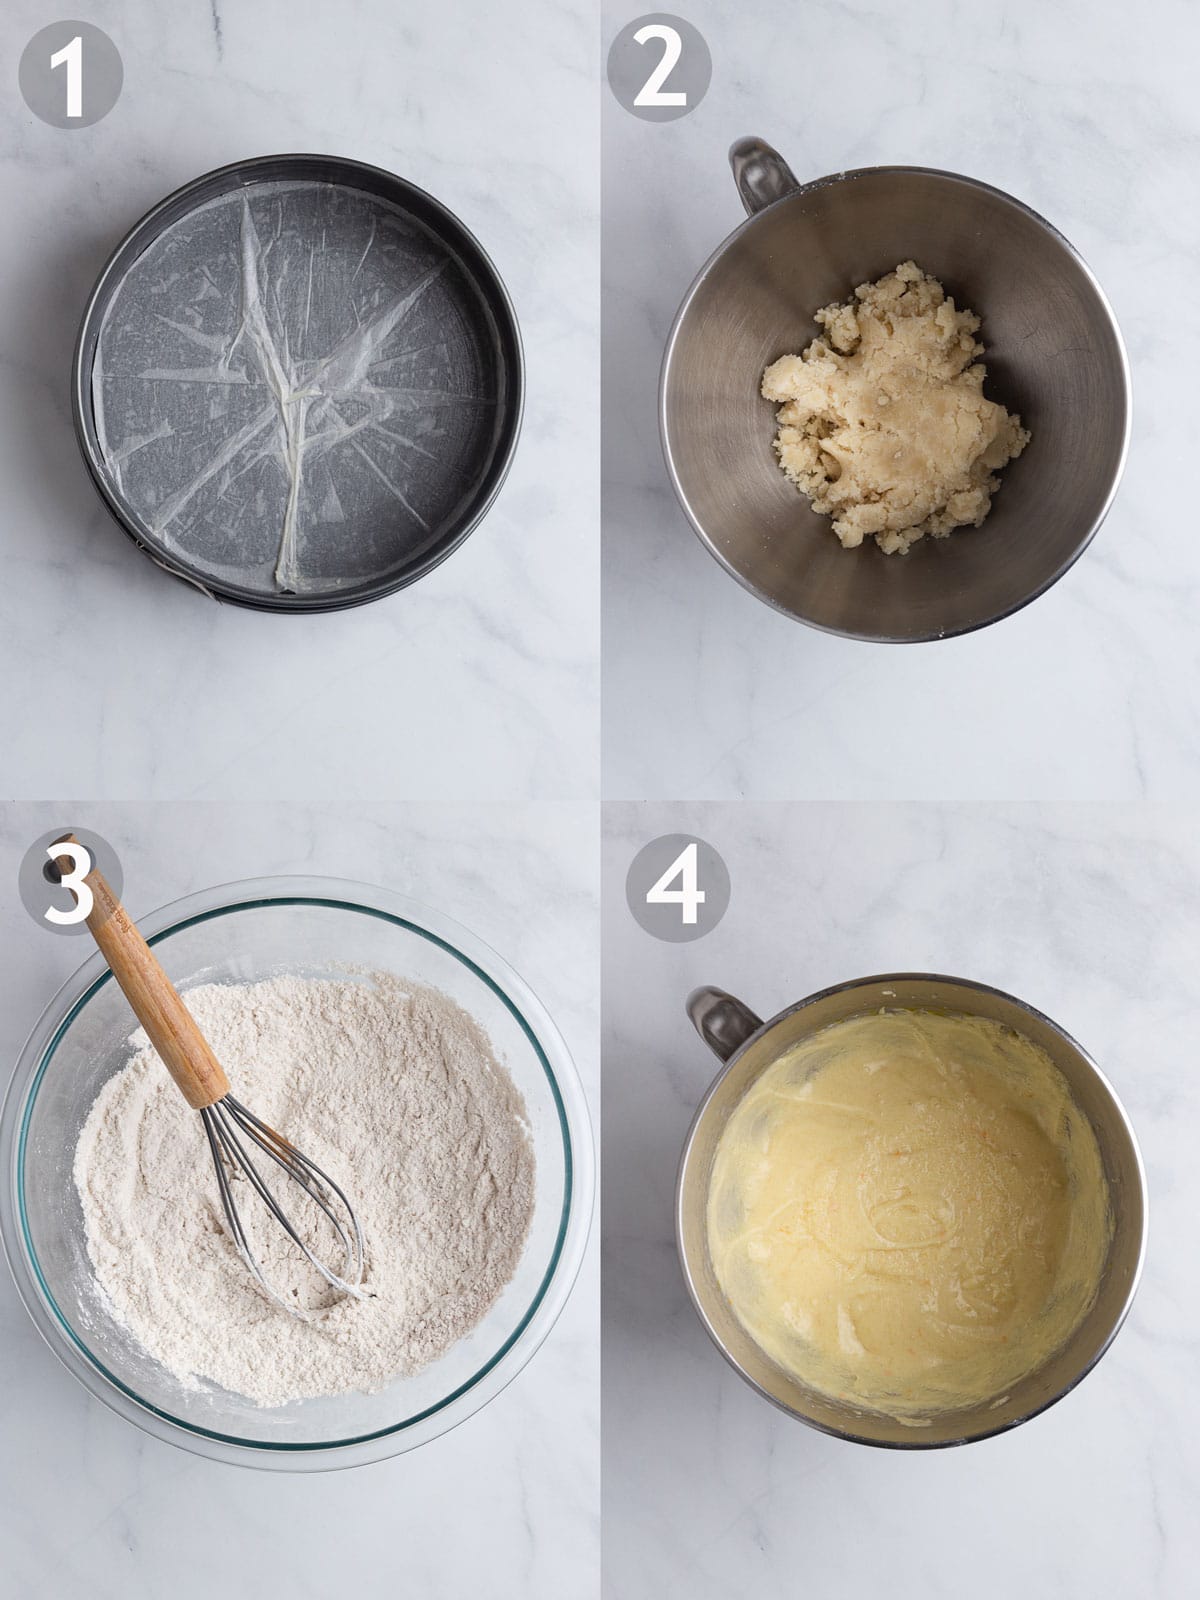 Cake Steps 1-4, including mixing dry ingredients, mixing almond paste and mixing wet ingredients.